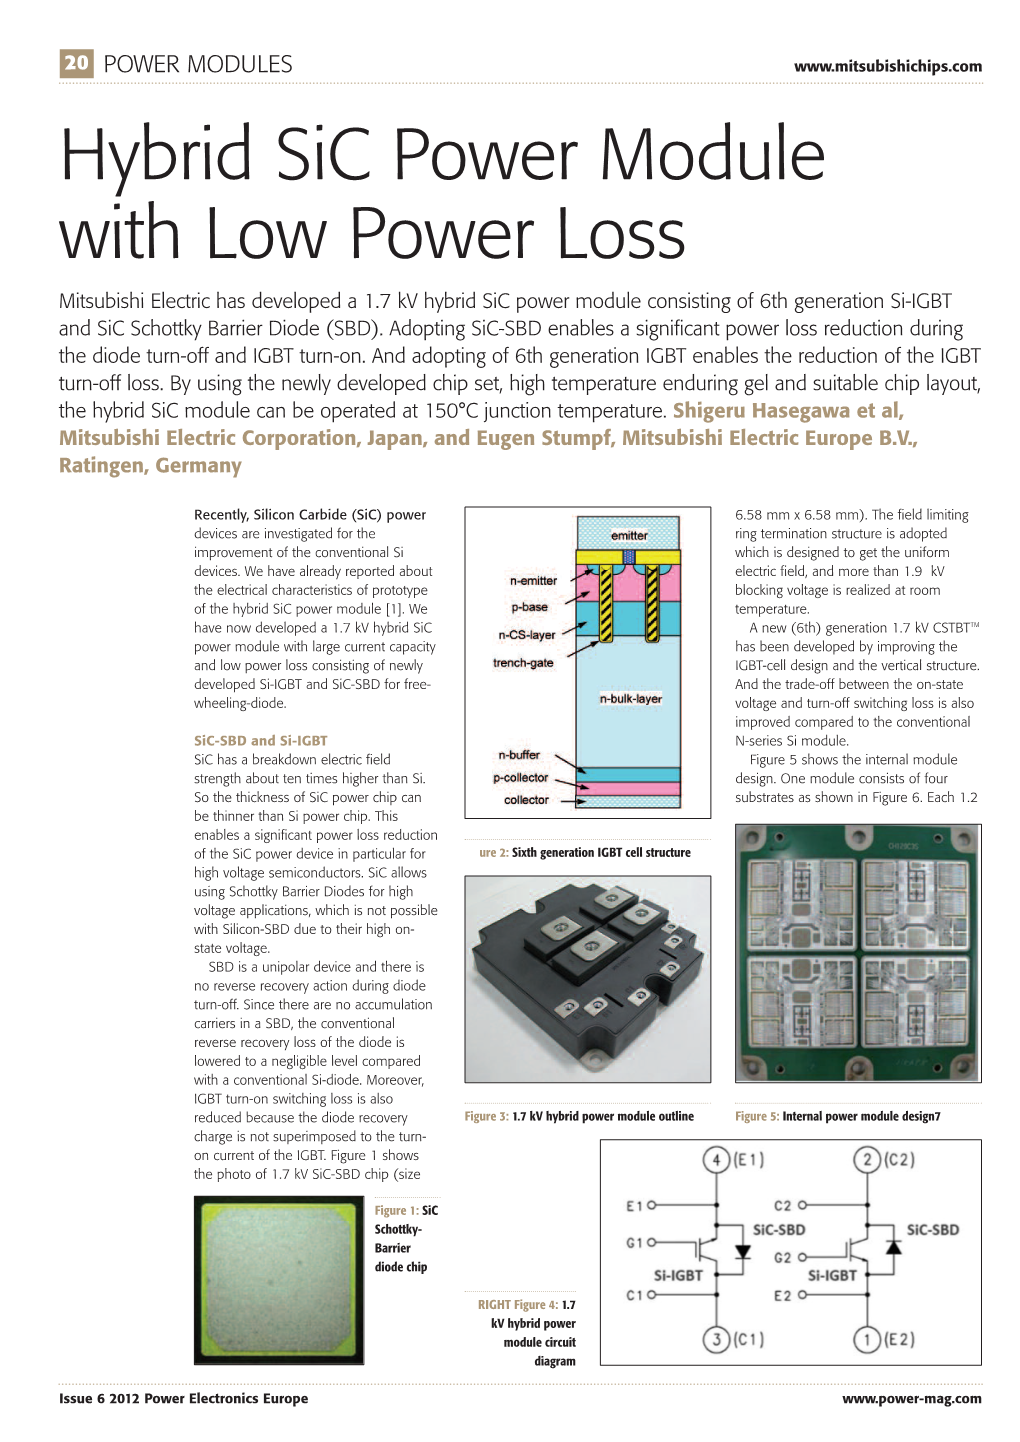 Hybrid Sic Power Module with Low Power Loss